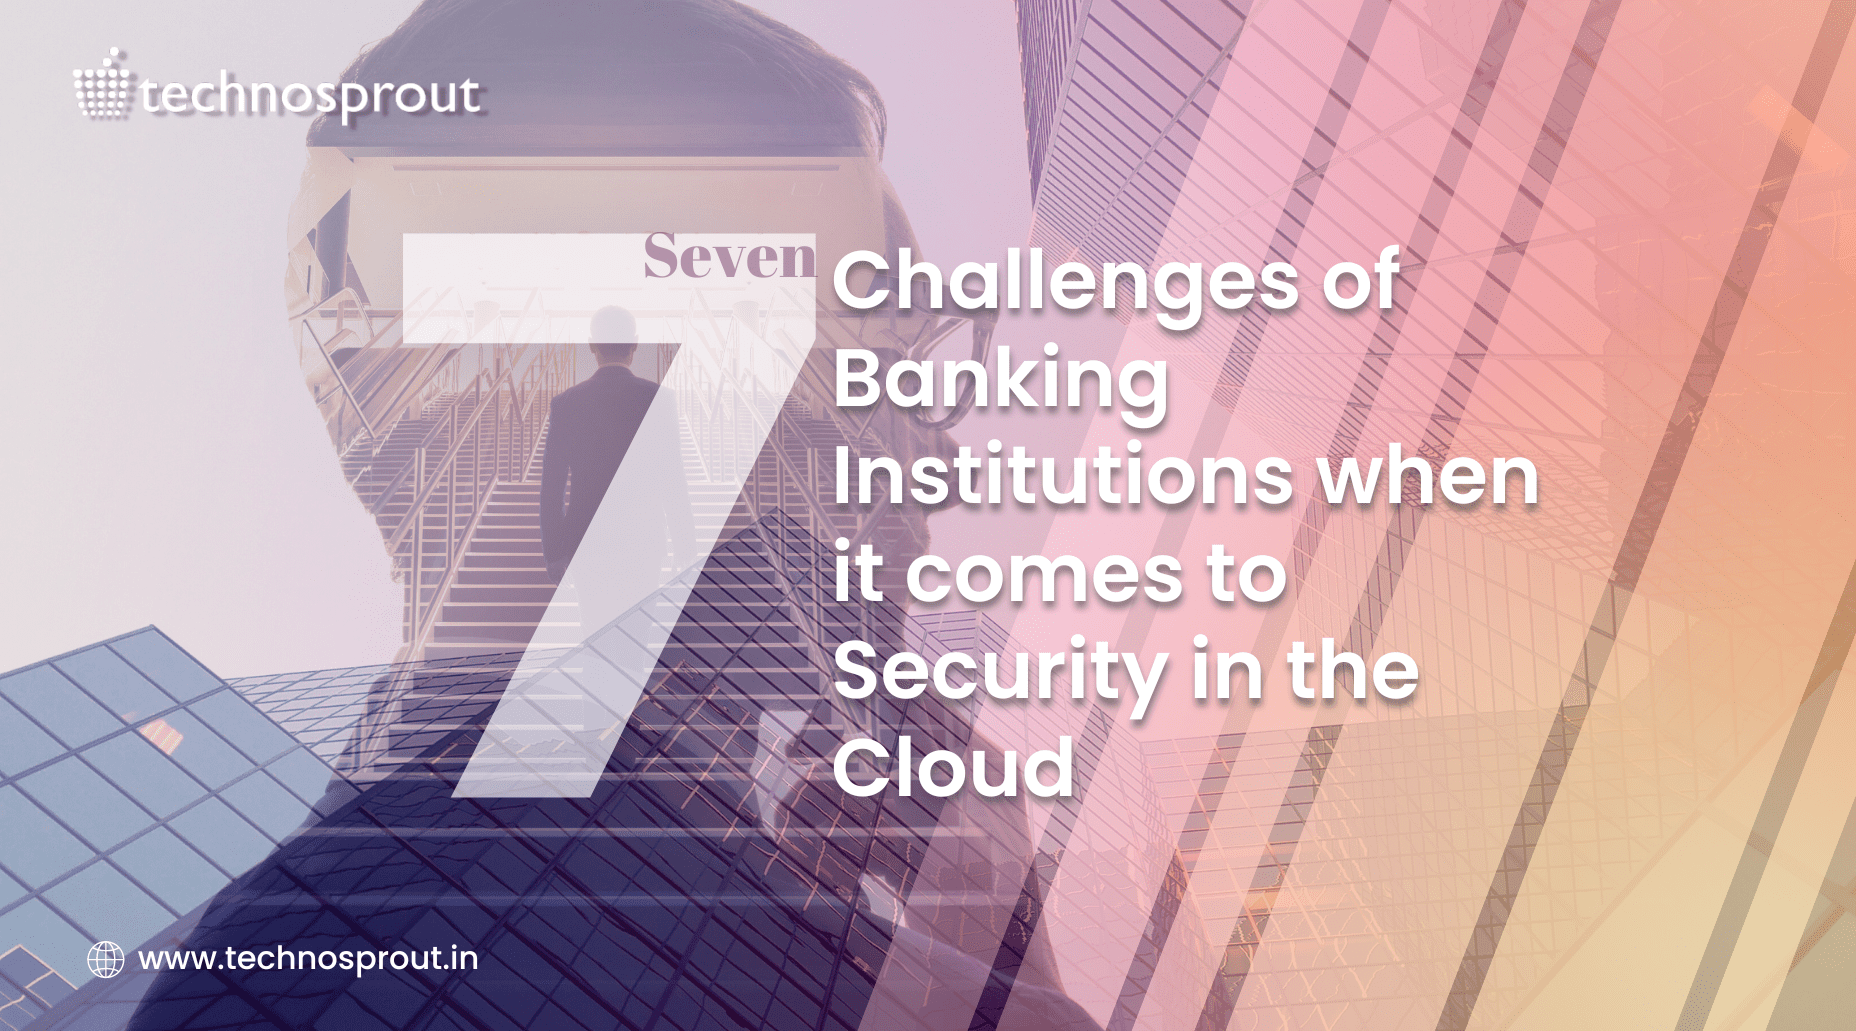 7 Challenges of Banking Institutions when it comes to Security in the Cloud